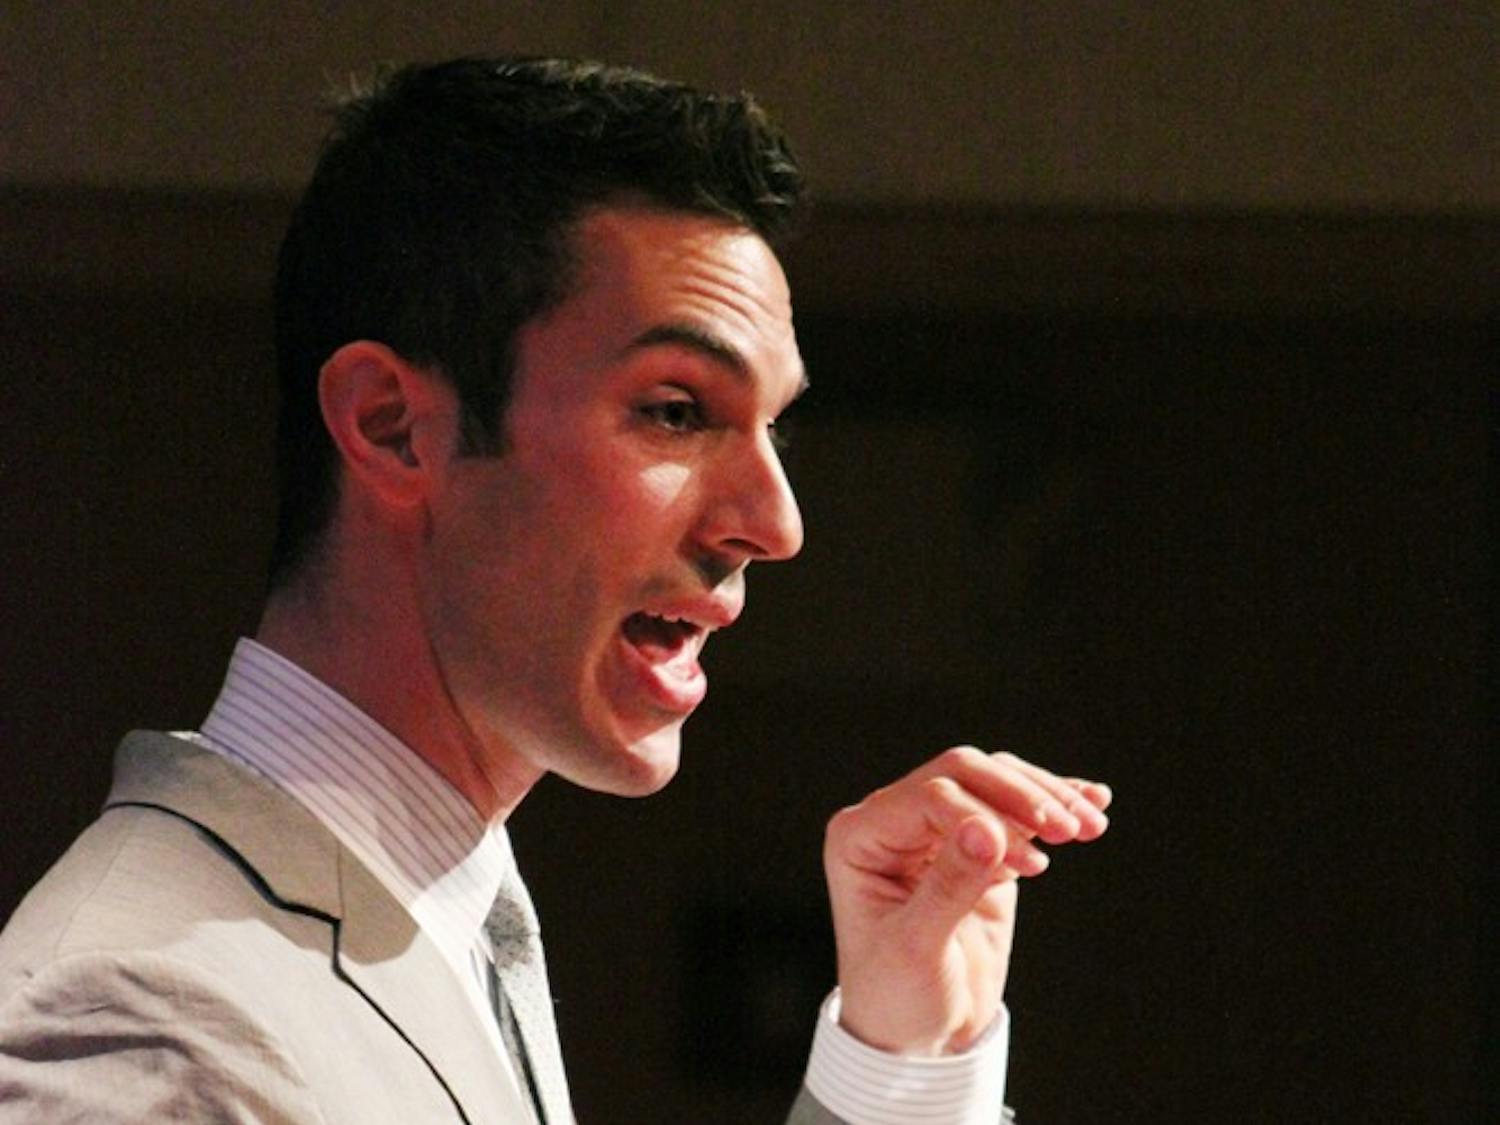 Ari Shapiro of NPR spoke in the Great Hall of the Union Wednesday night, focusing on American politics and the Obama administration.